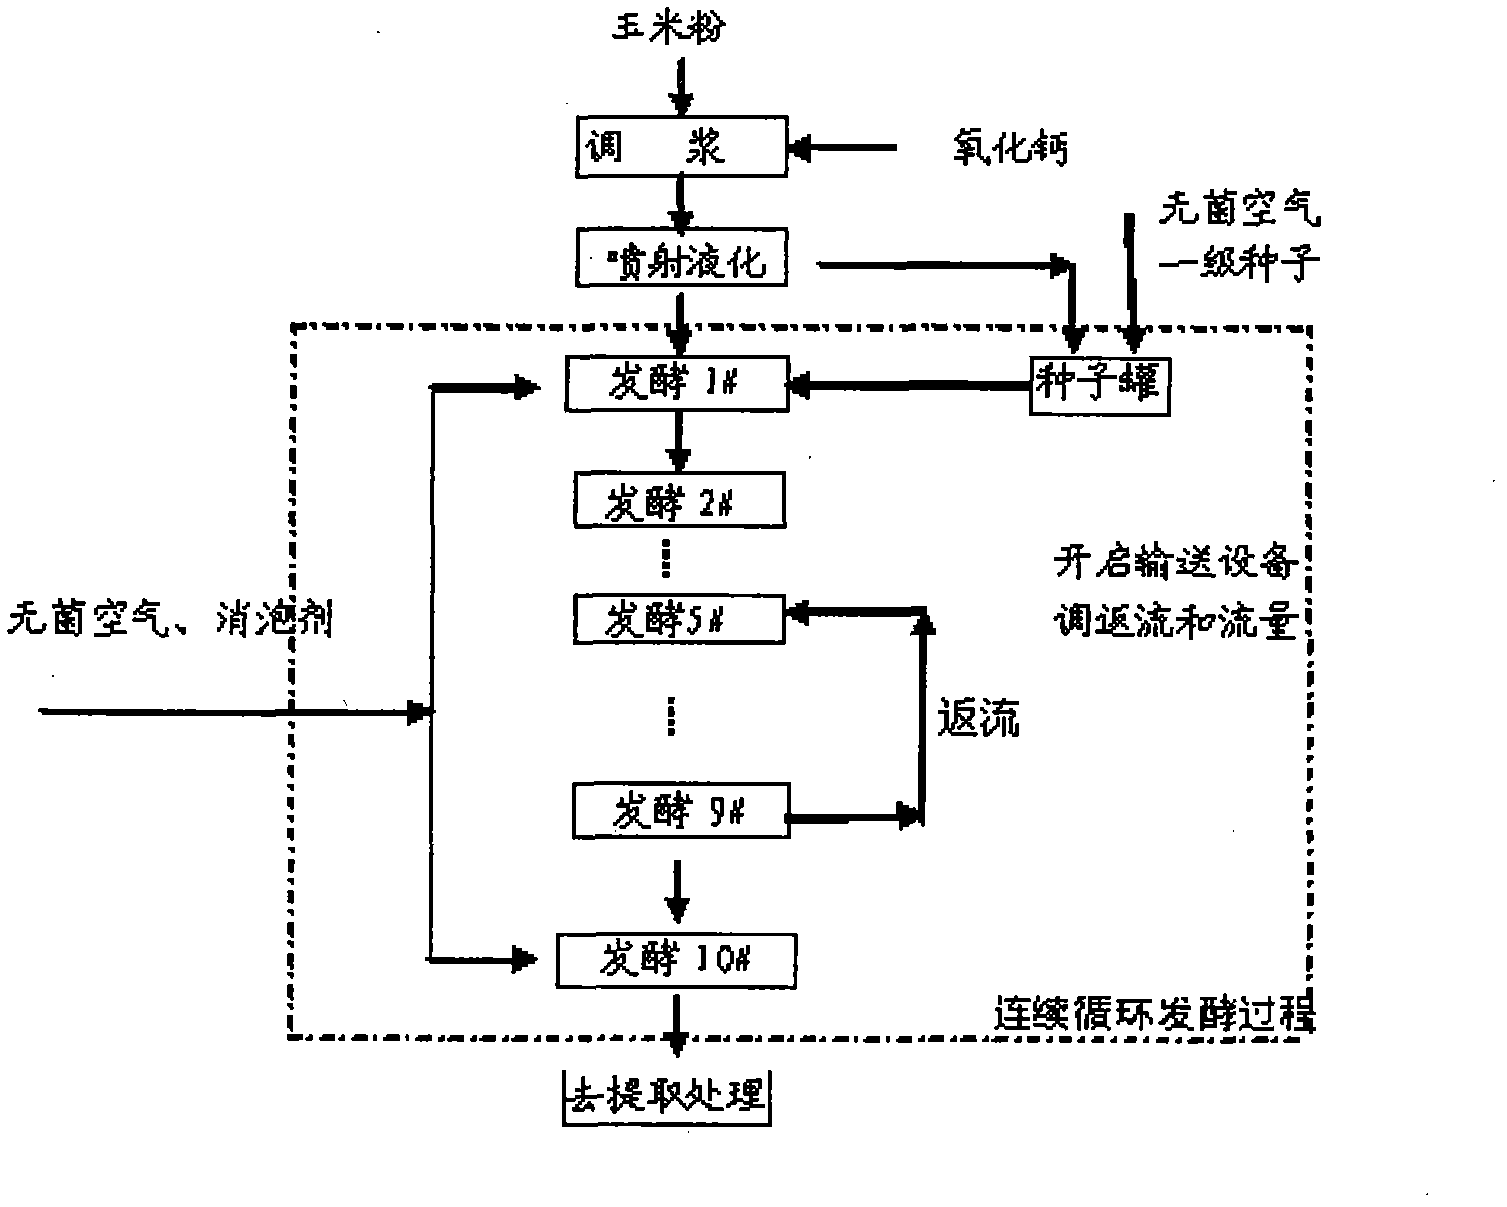 Method for continuous cycle fermentation production of citric acid